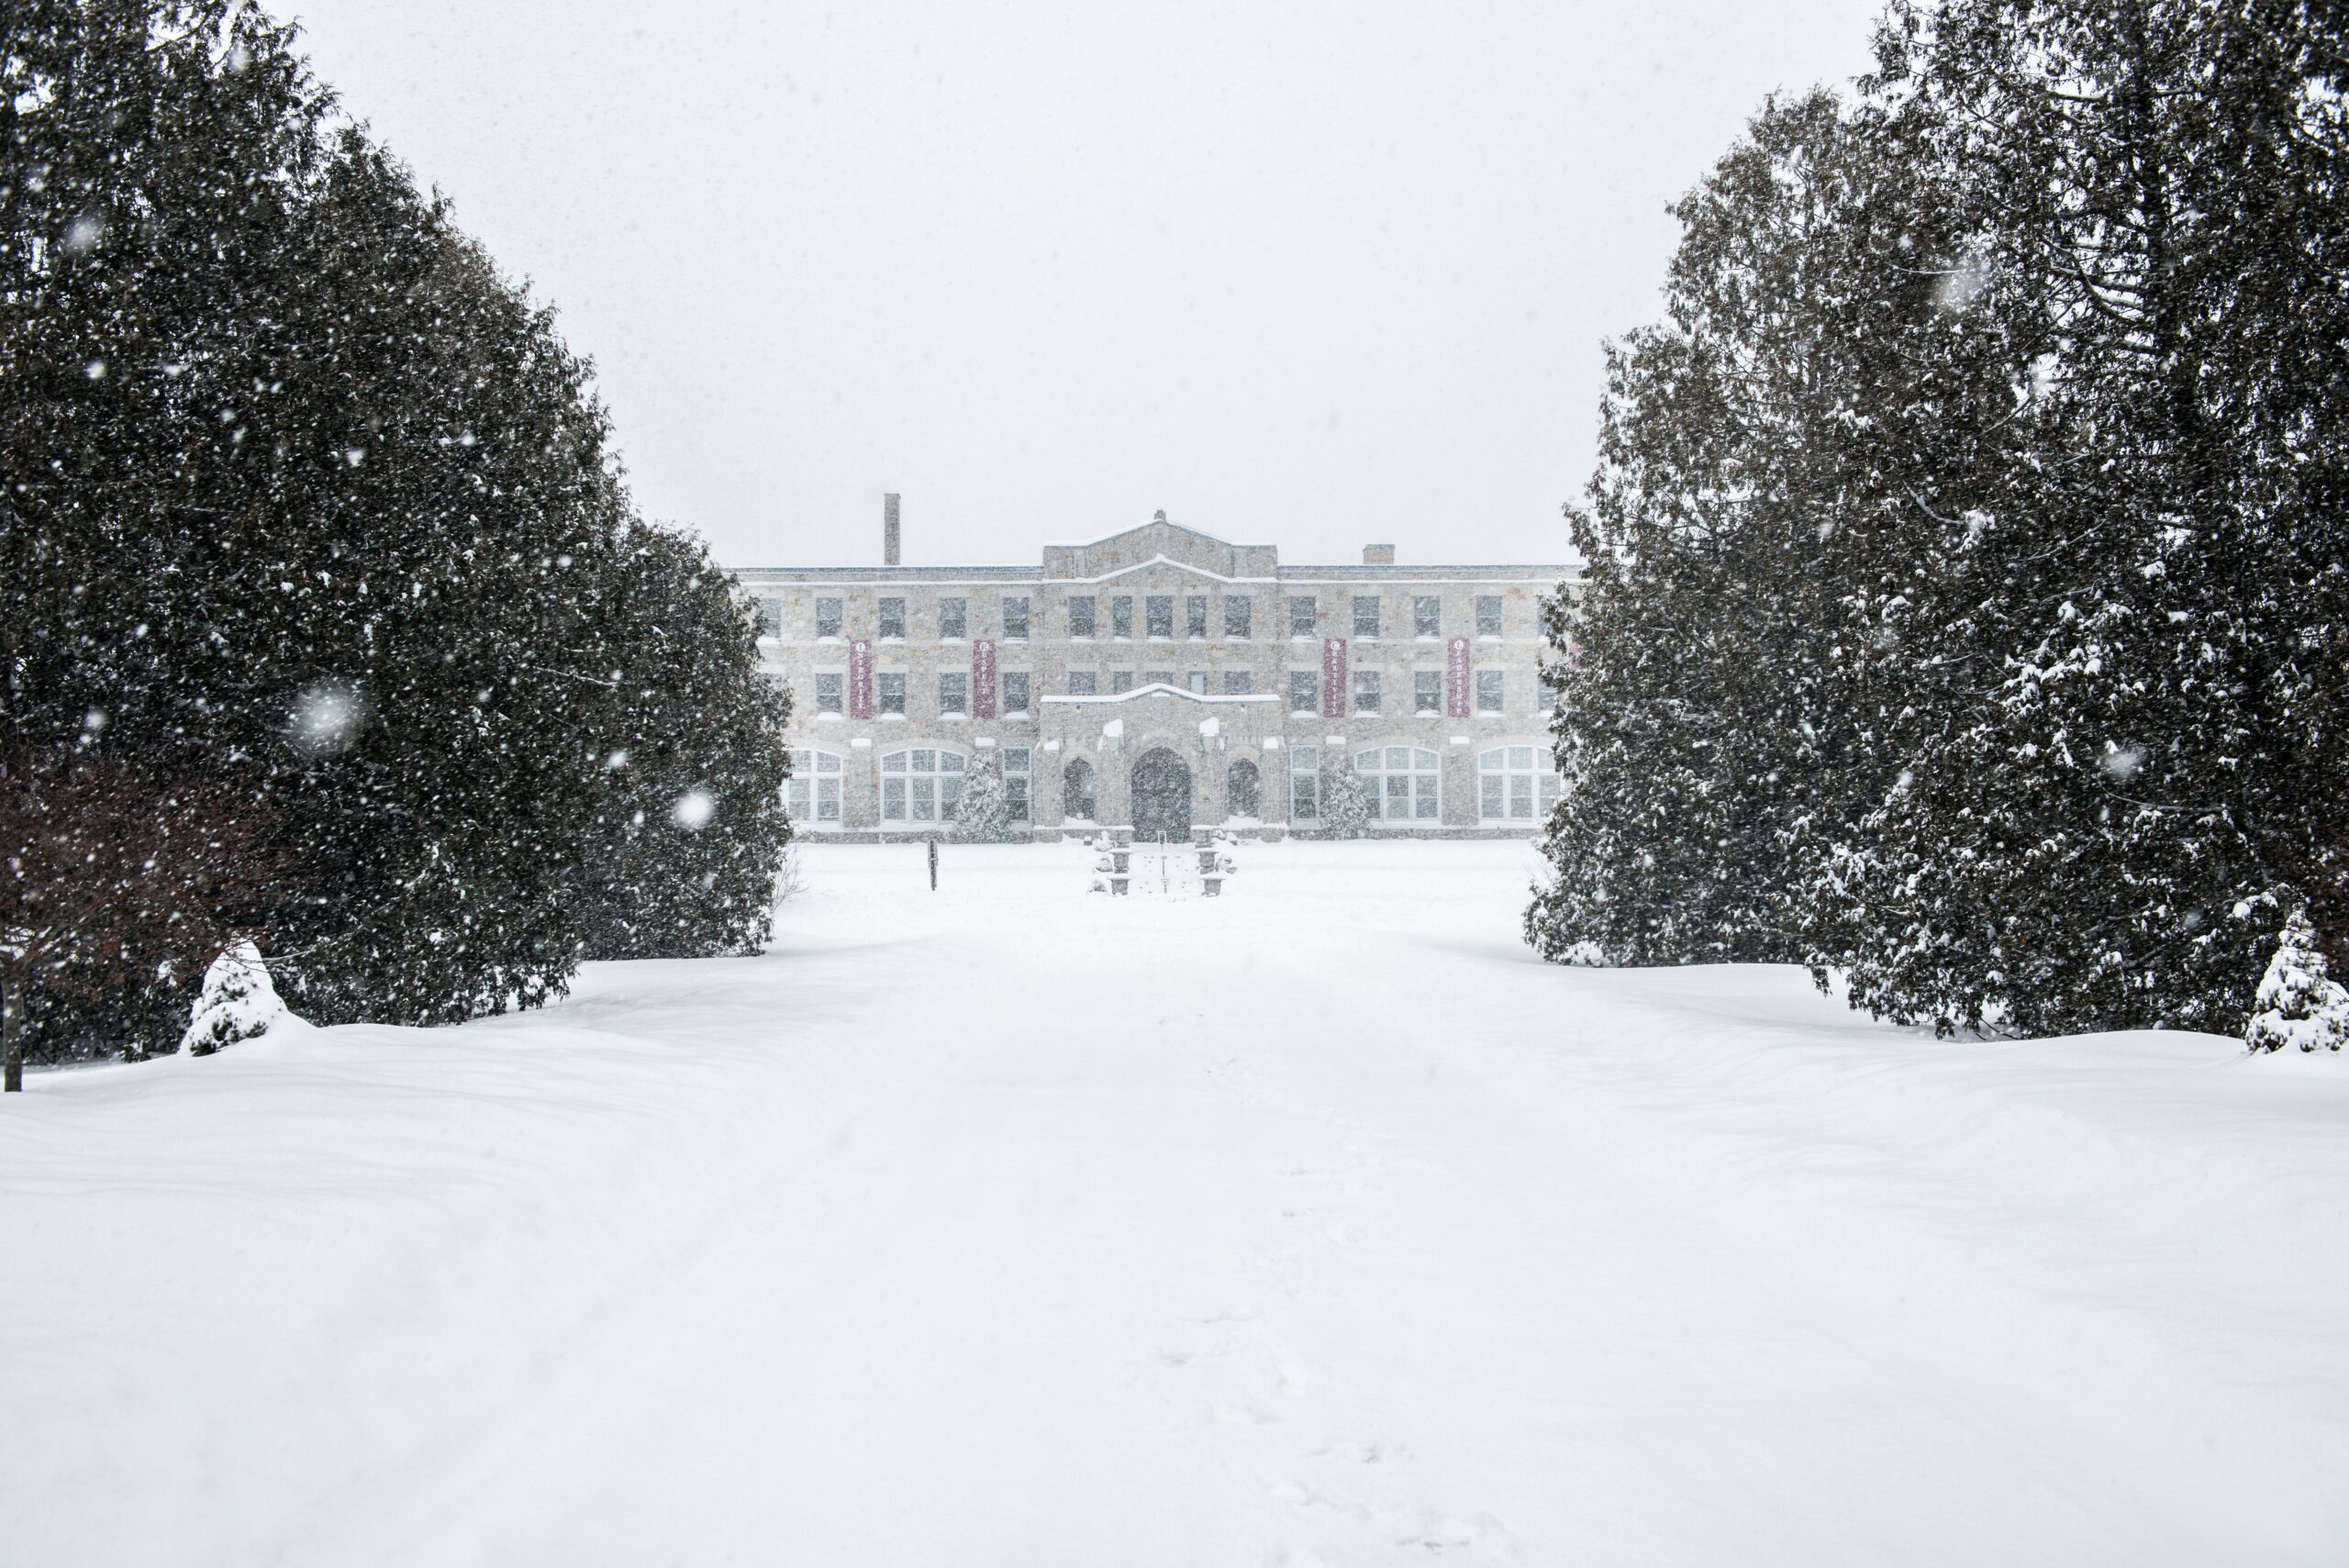 Fairhaven is a significant town in Massachusetts and film location. Learn more about travel opportunities. 
pictured: a large school in Fairhaven on a thick snowy day